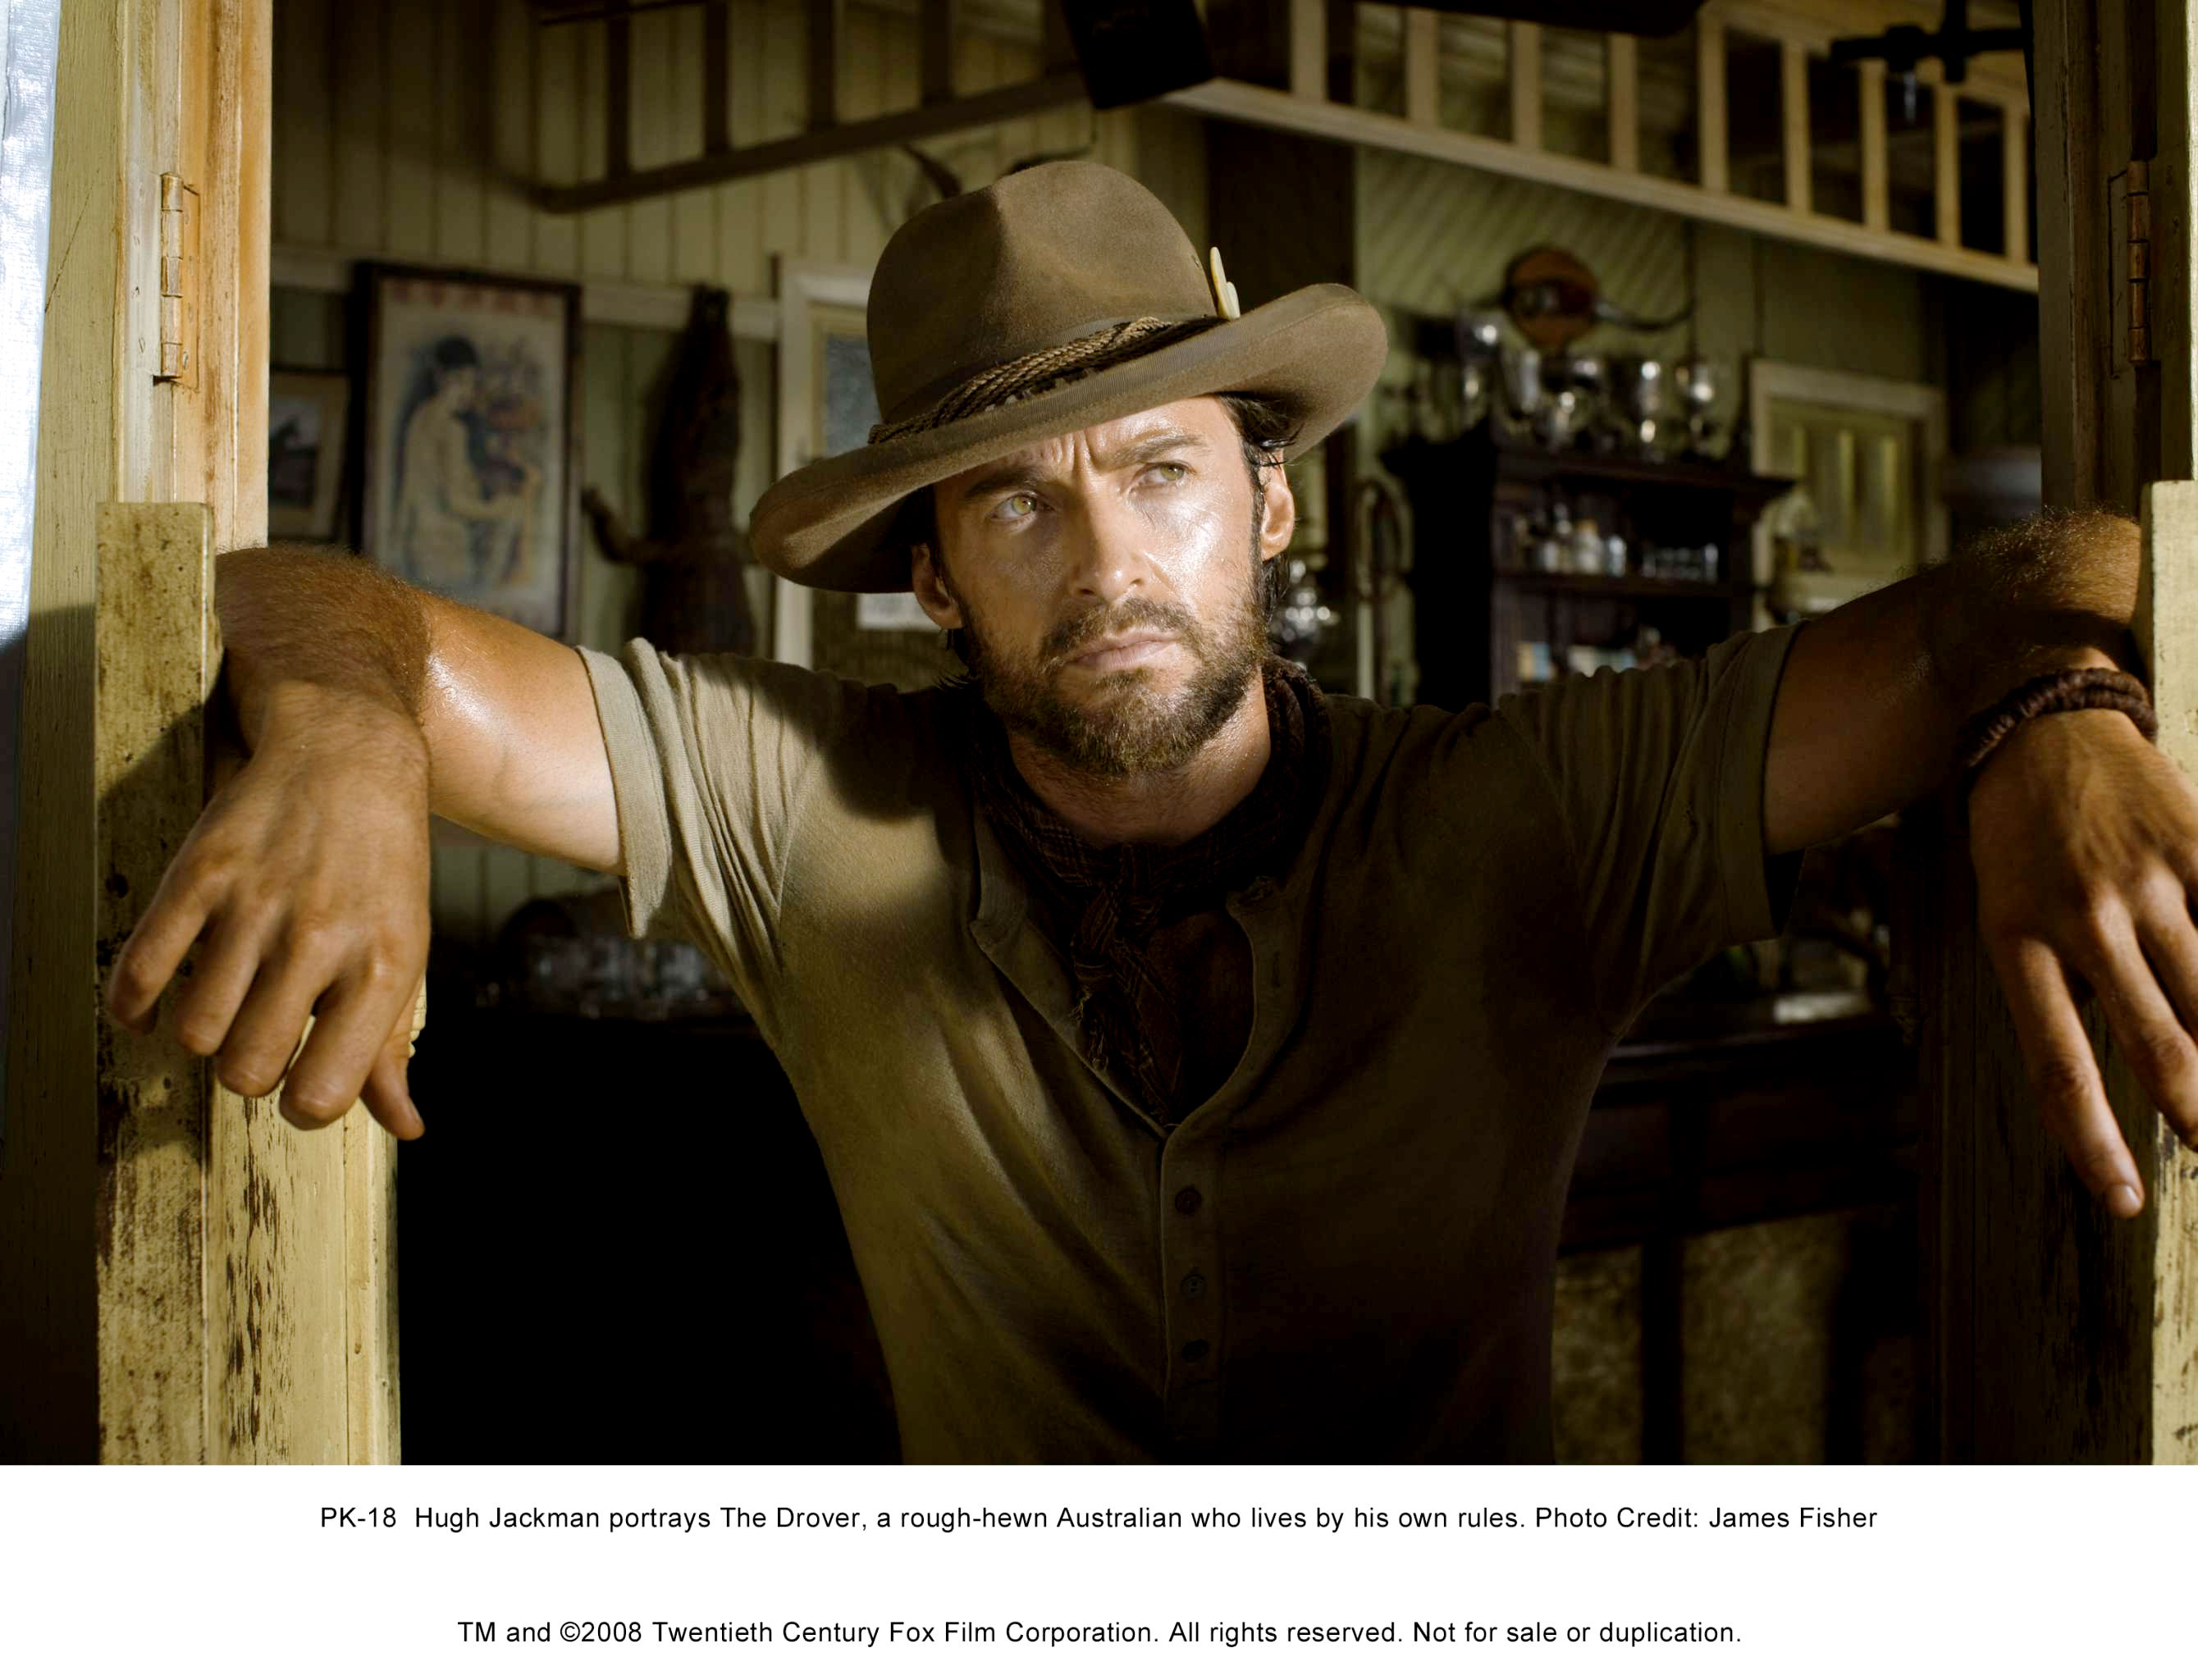 Hugh Jackman stars as The Drover in The 20th Century Fox's Australia (2008). Photo credit by James Fisher.